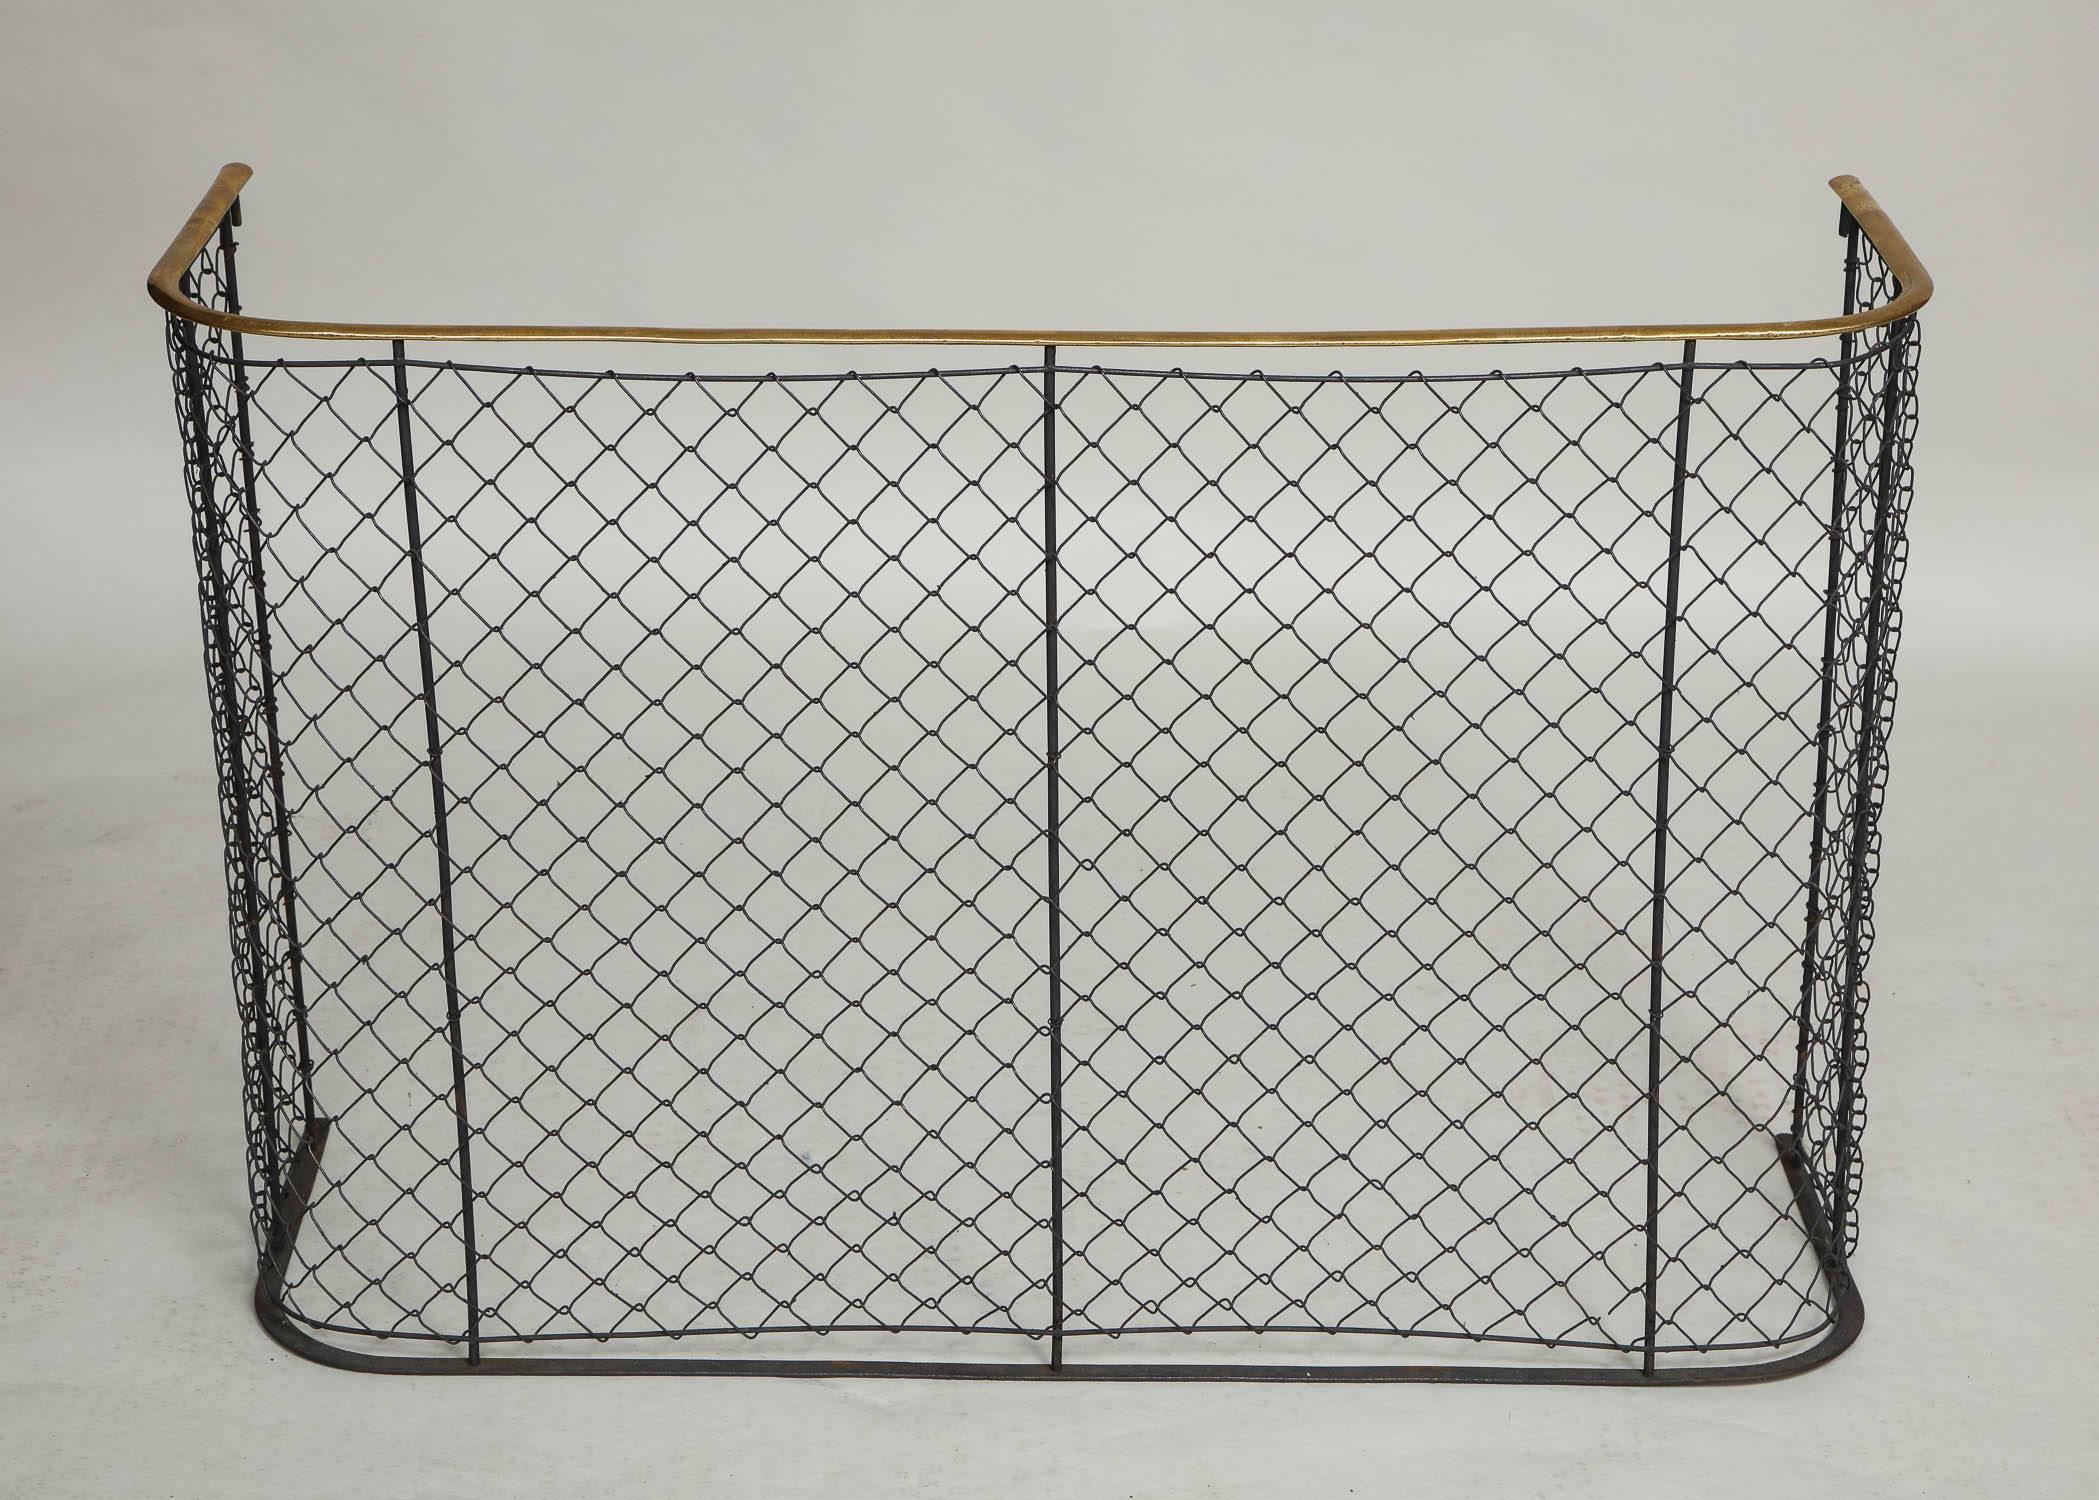 19th century English brass railed wrought iron and wirework nursery guard with wide 